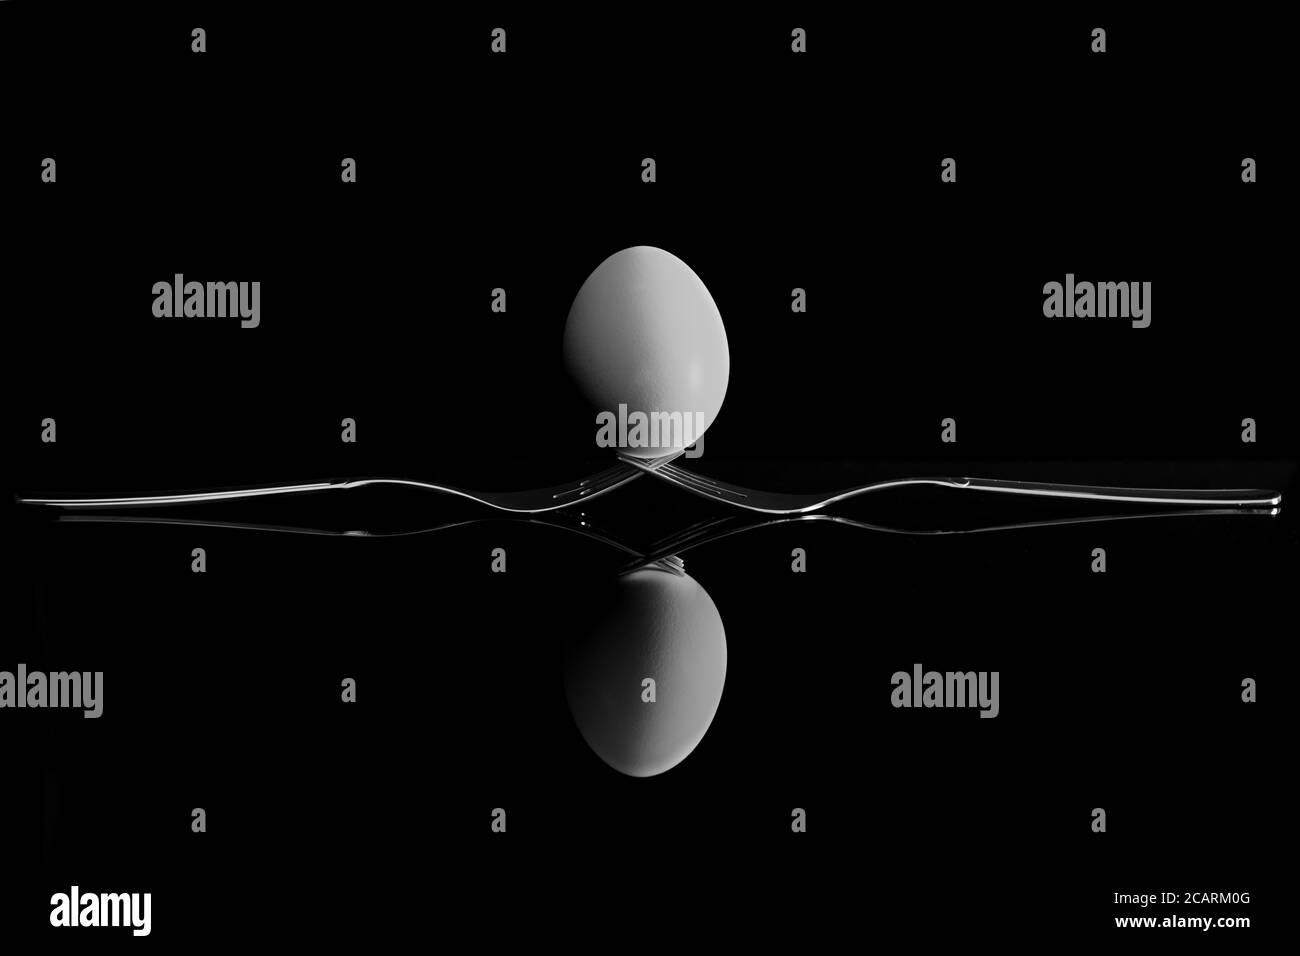 An egg balancing on two forks. Reflection on a black background. Stock Photo